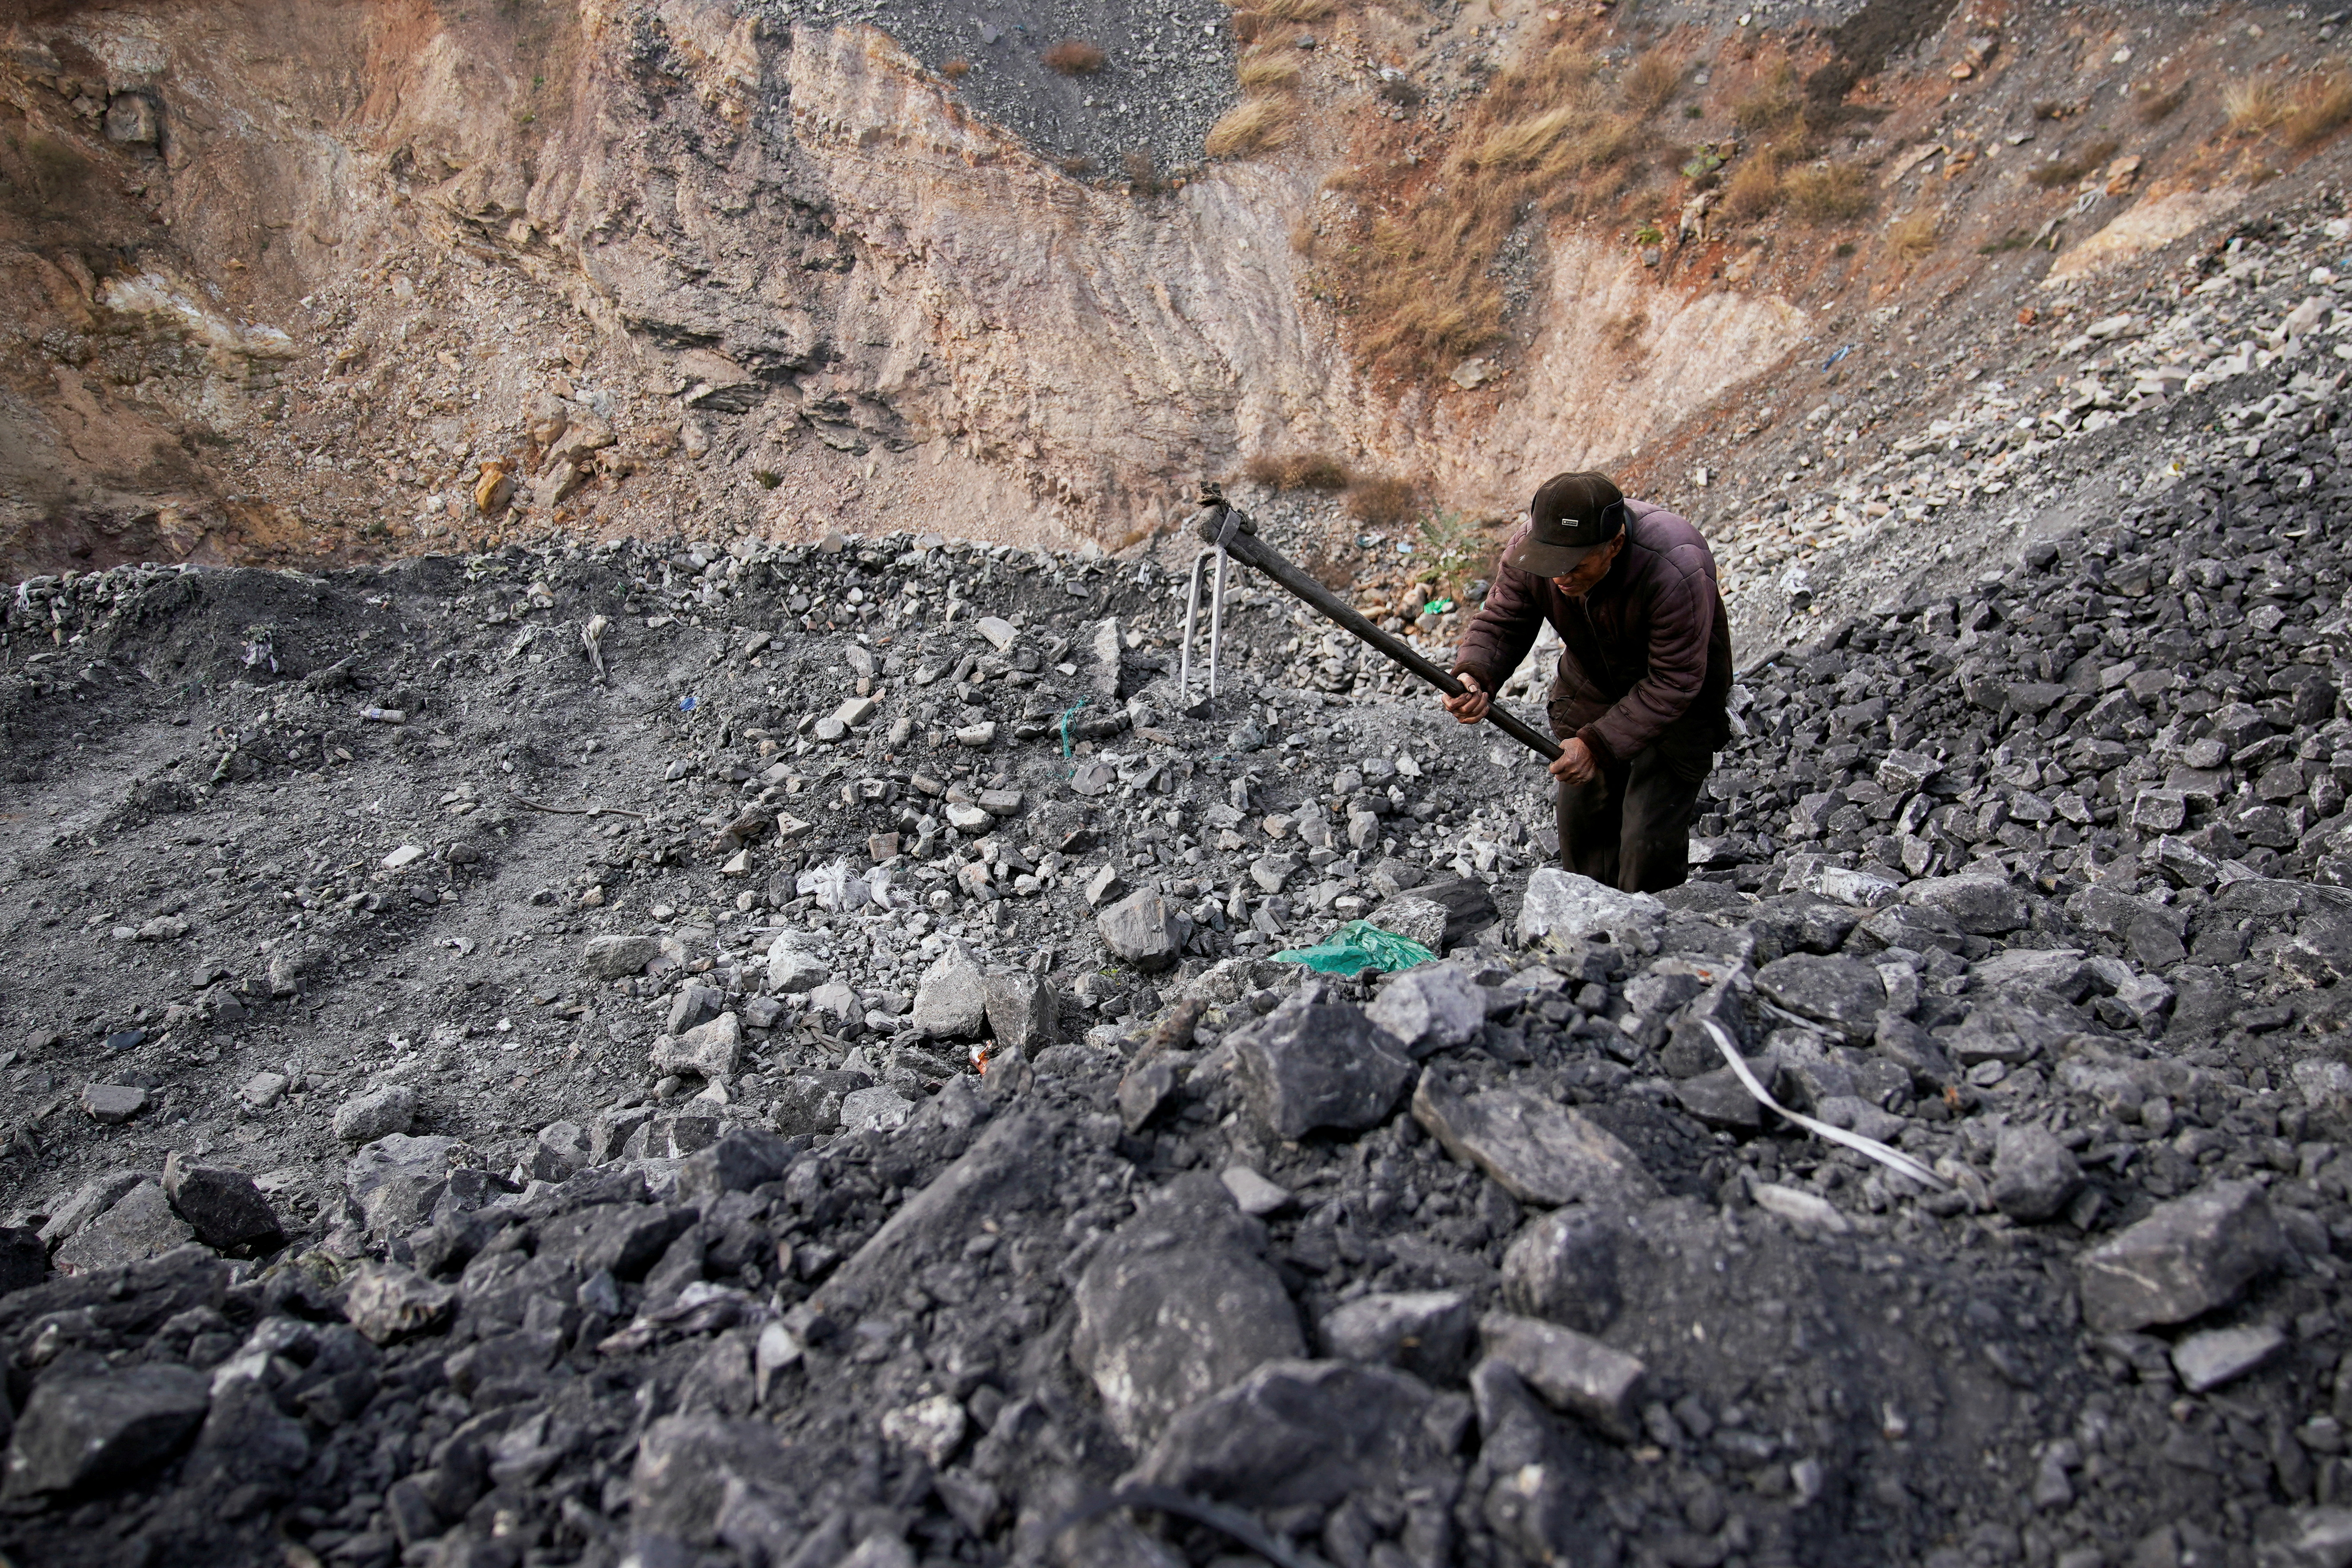 A man sifts through dunes of low-grade coal near a coal mine in China